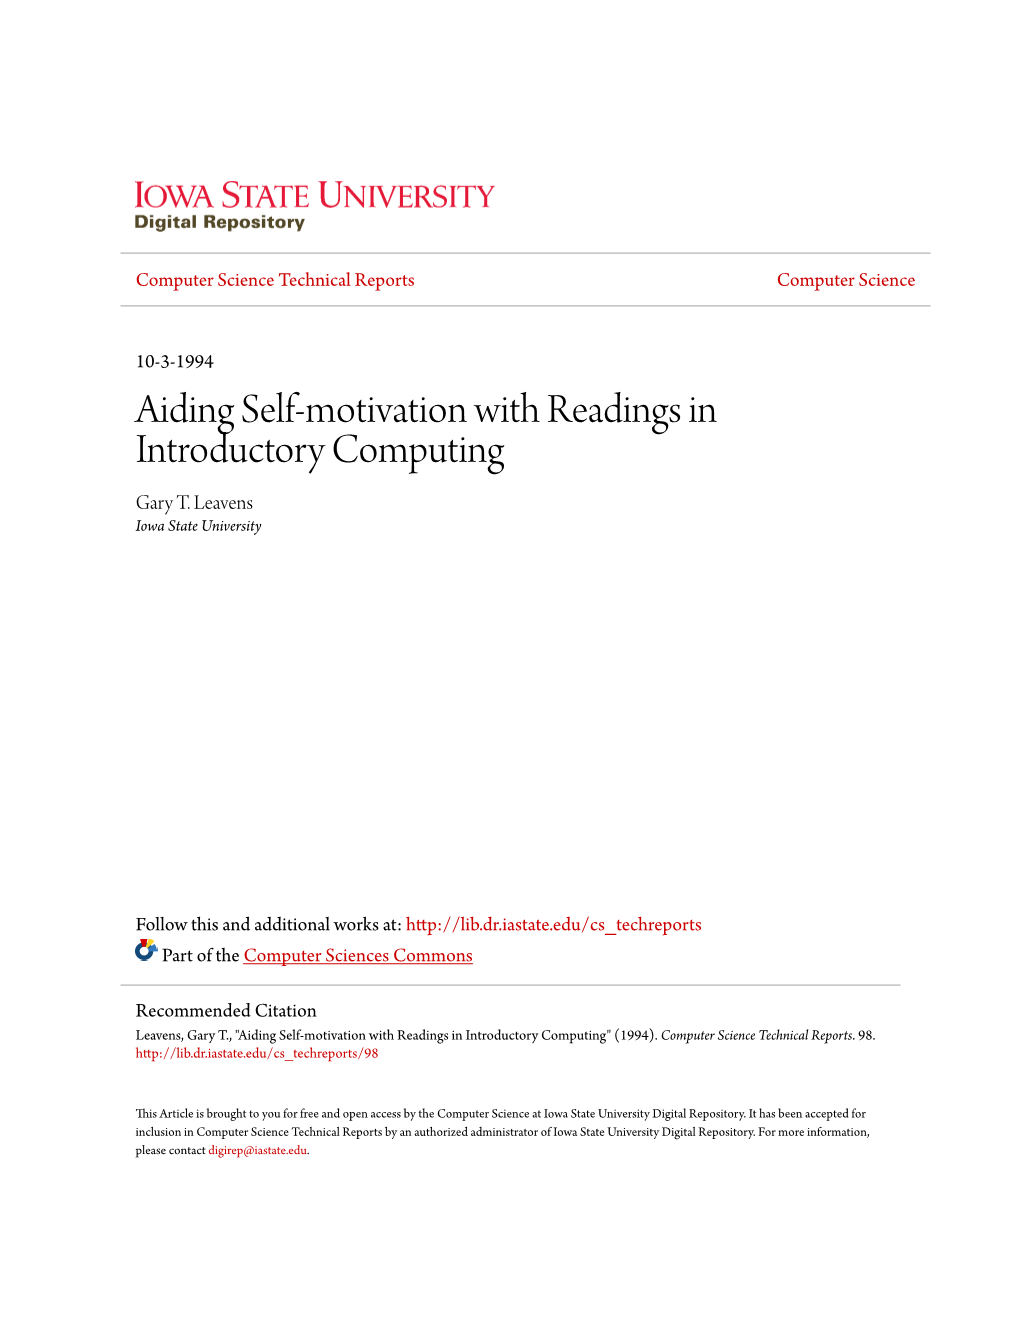 Aiding Self-Motivation with Readings in Introductory Computing Gary T